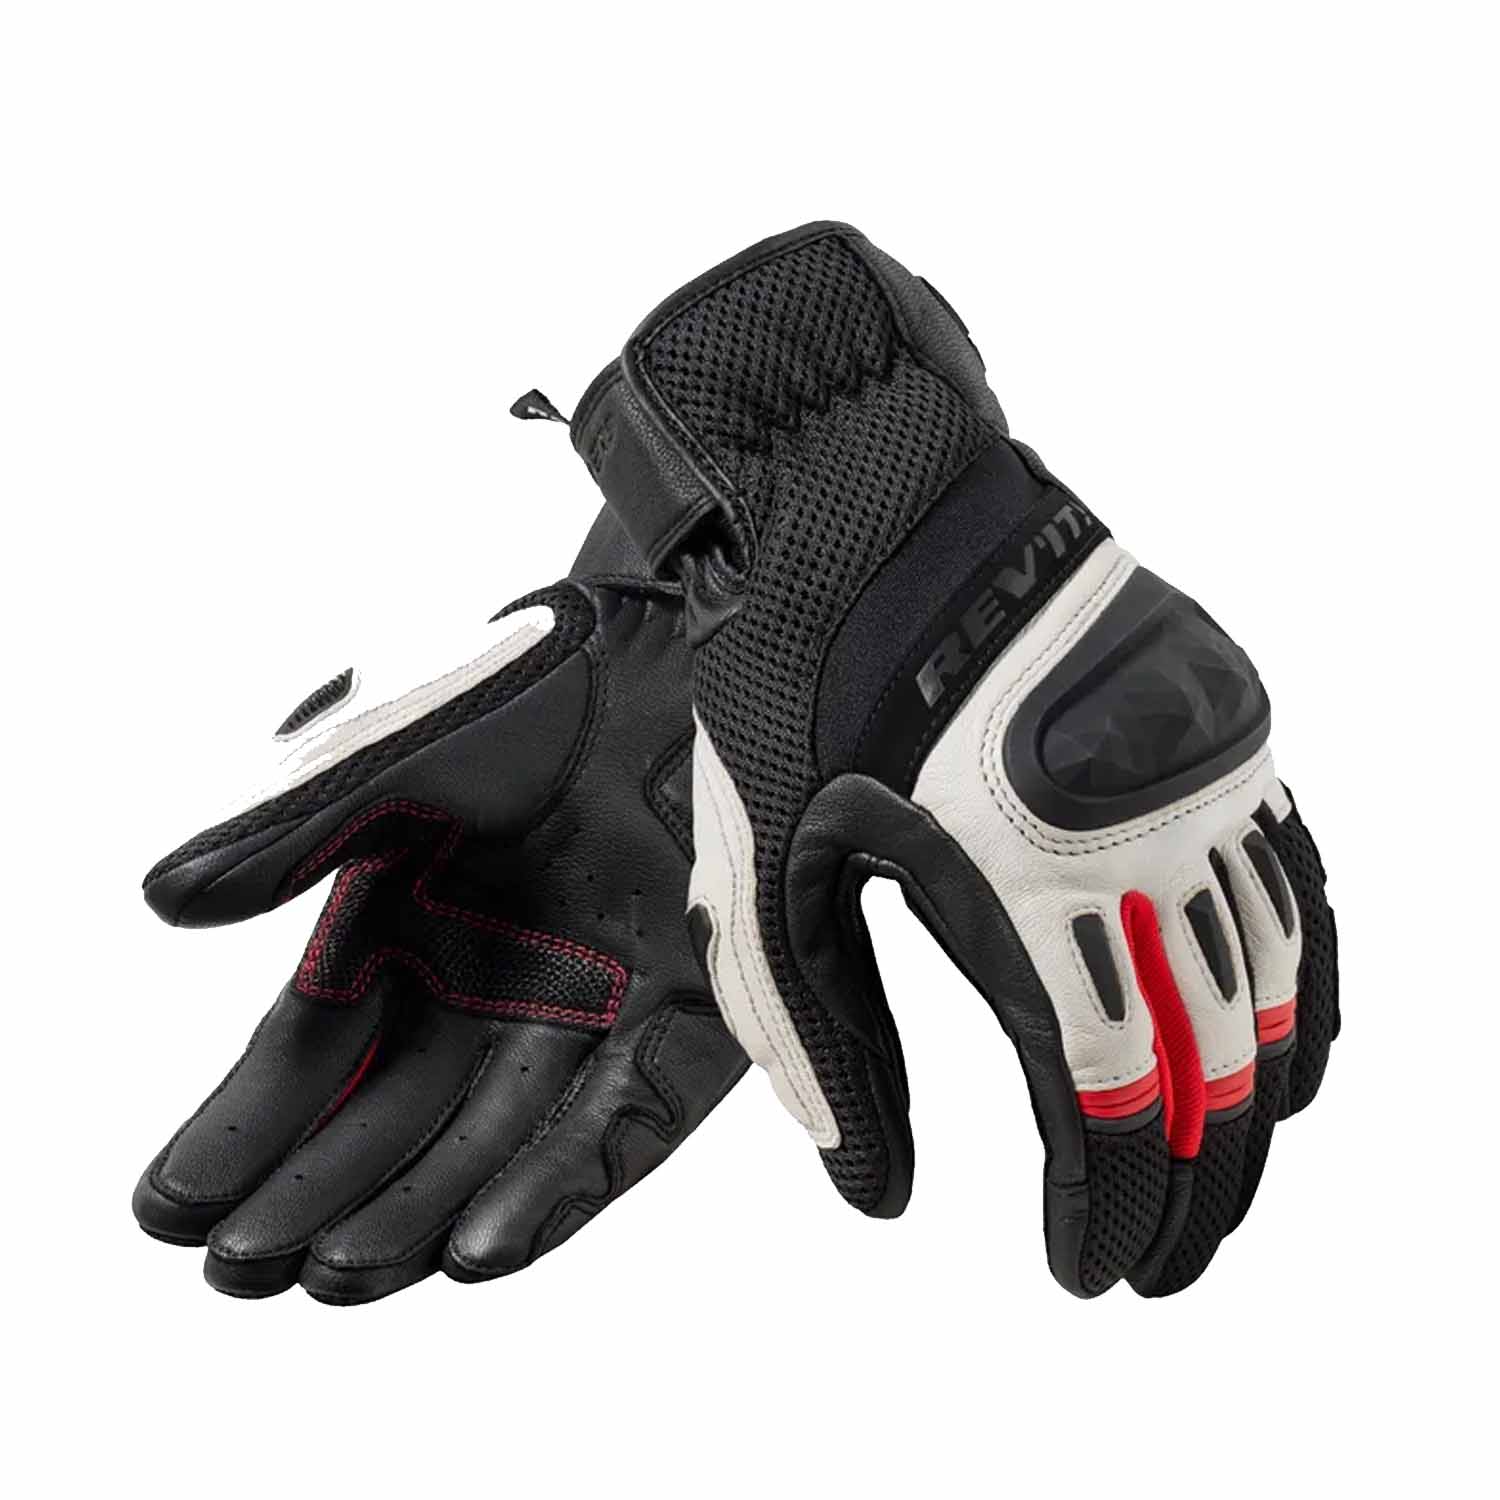 Image of REV'IT! Dirt 4 Gloves Black Red Taille M